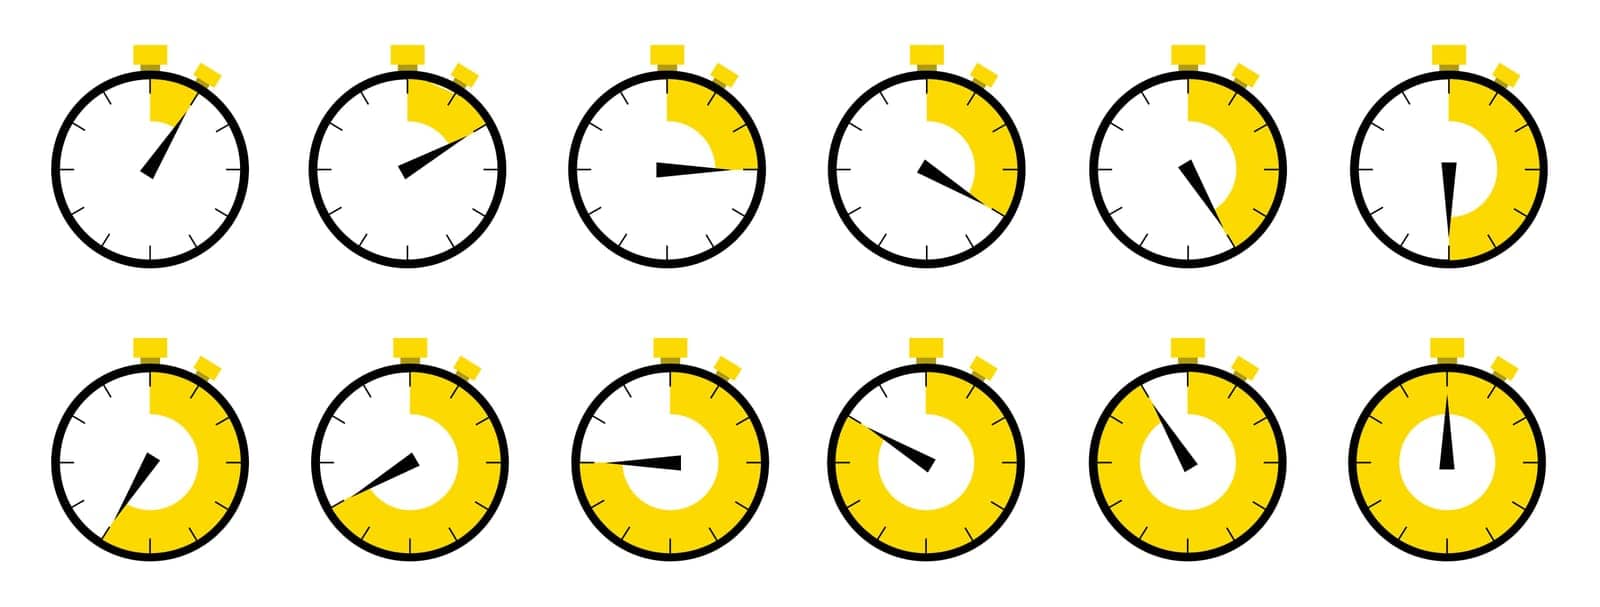 Horizontal set of analog clock icon by MakeVector